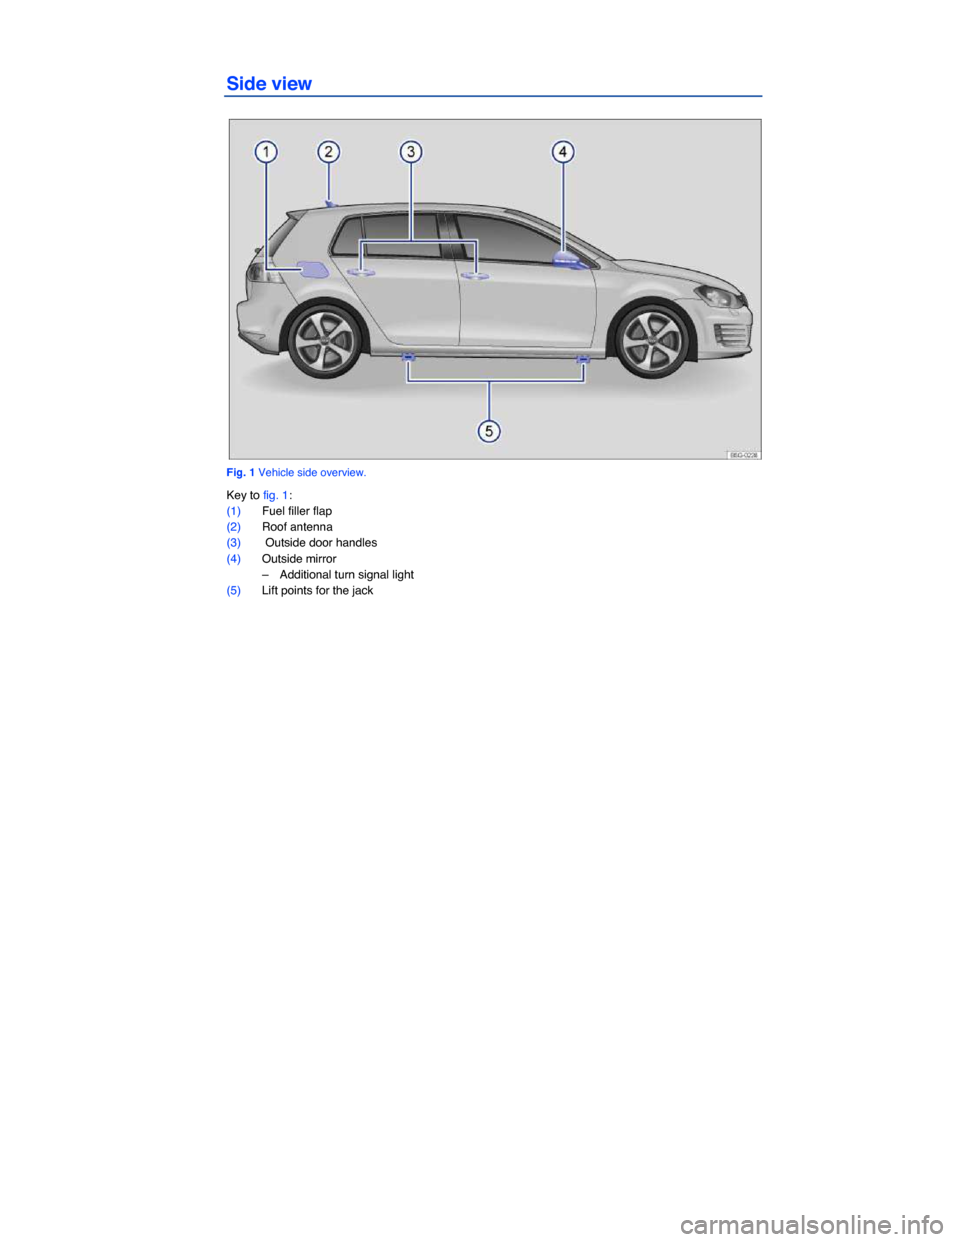 VOLKSWAGEN GOLF GTI 2015 5G / 7.G Owners Manual  
Side view 
 
Fig. 1 Vehicle side overview. 
Key to fig. 1: 
(1) Fuel filler flap  
(2) Roof antenna  
(3)  Outside door handles  
(4) Outside mirror  
–  Additional turn signal light  
(5) Lift po